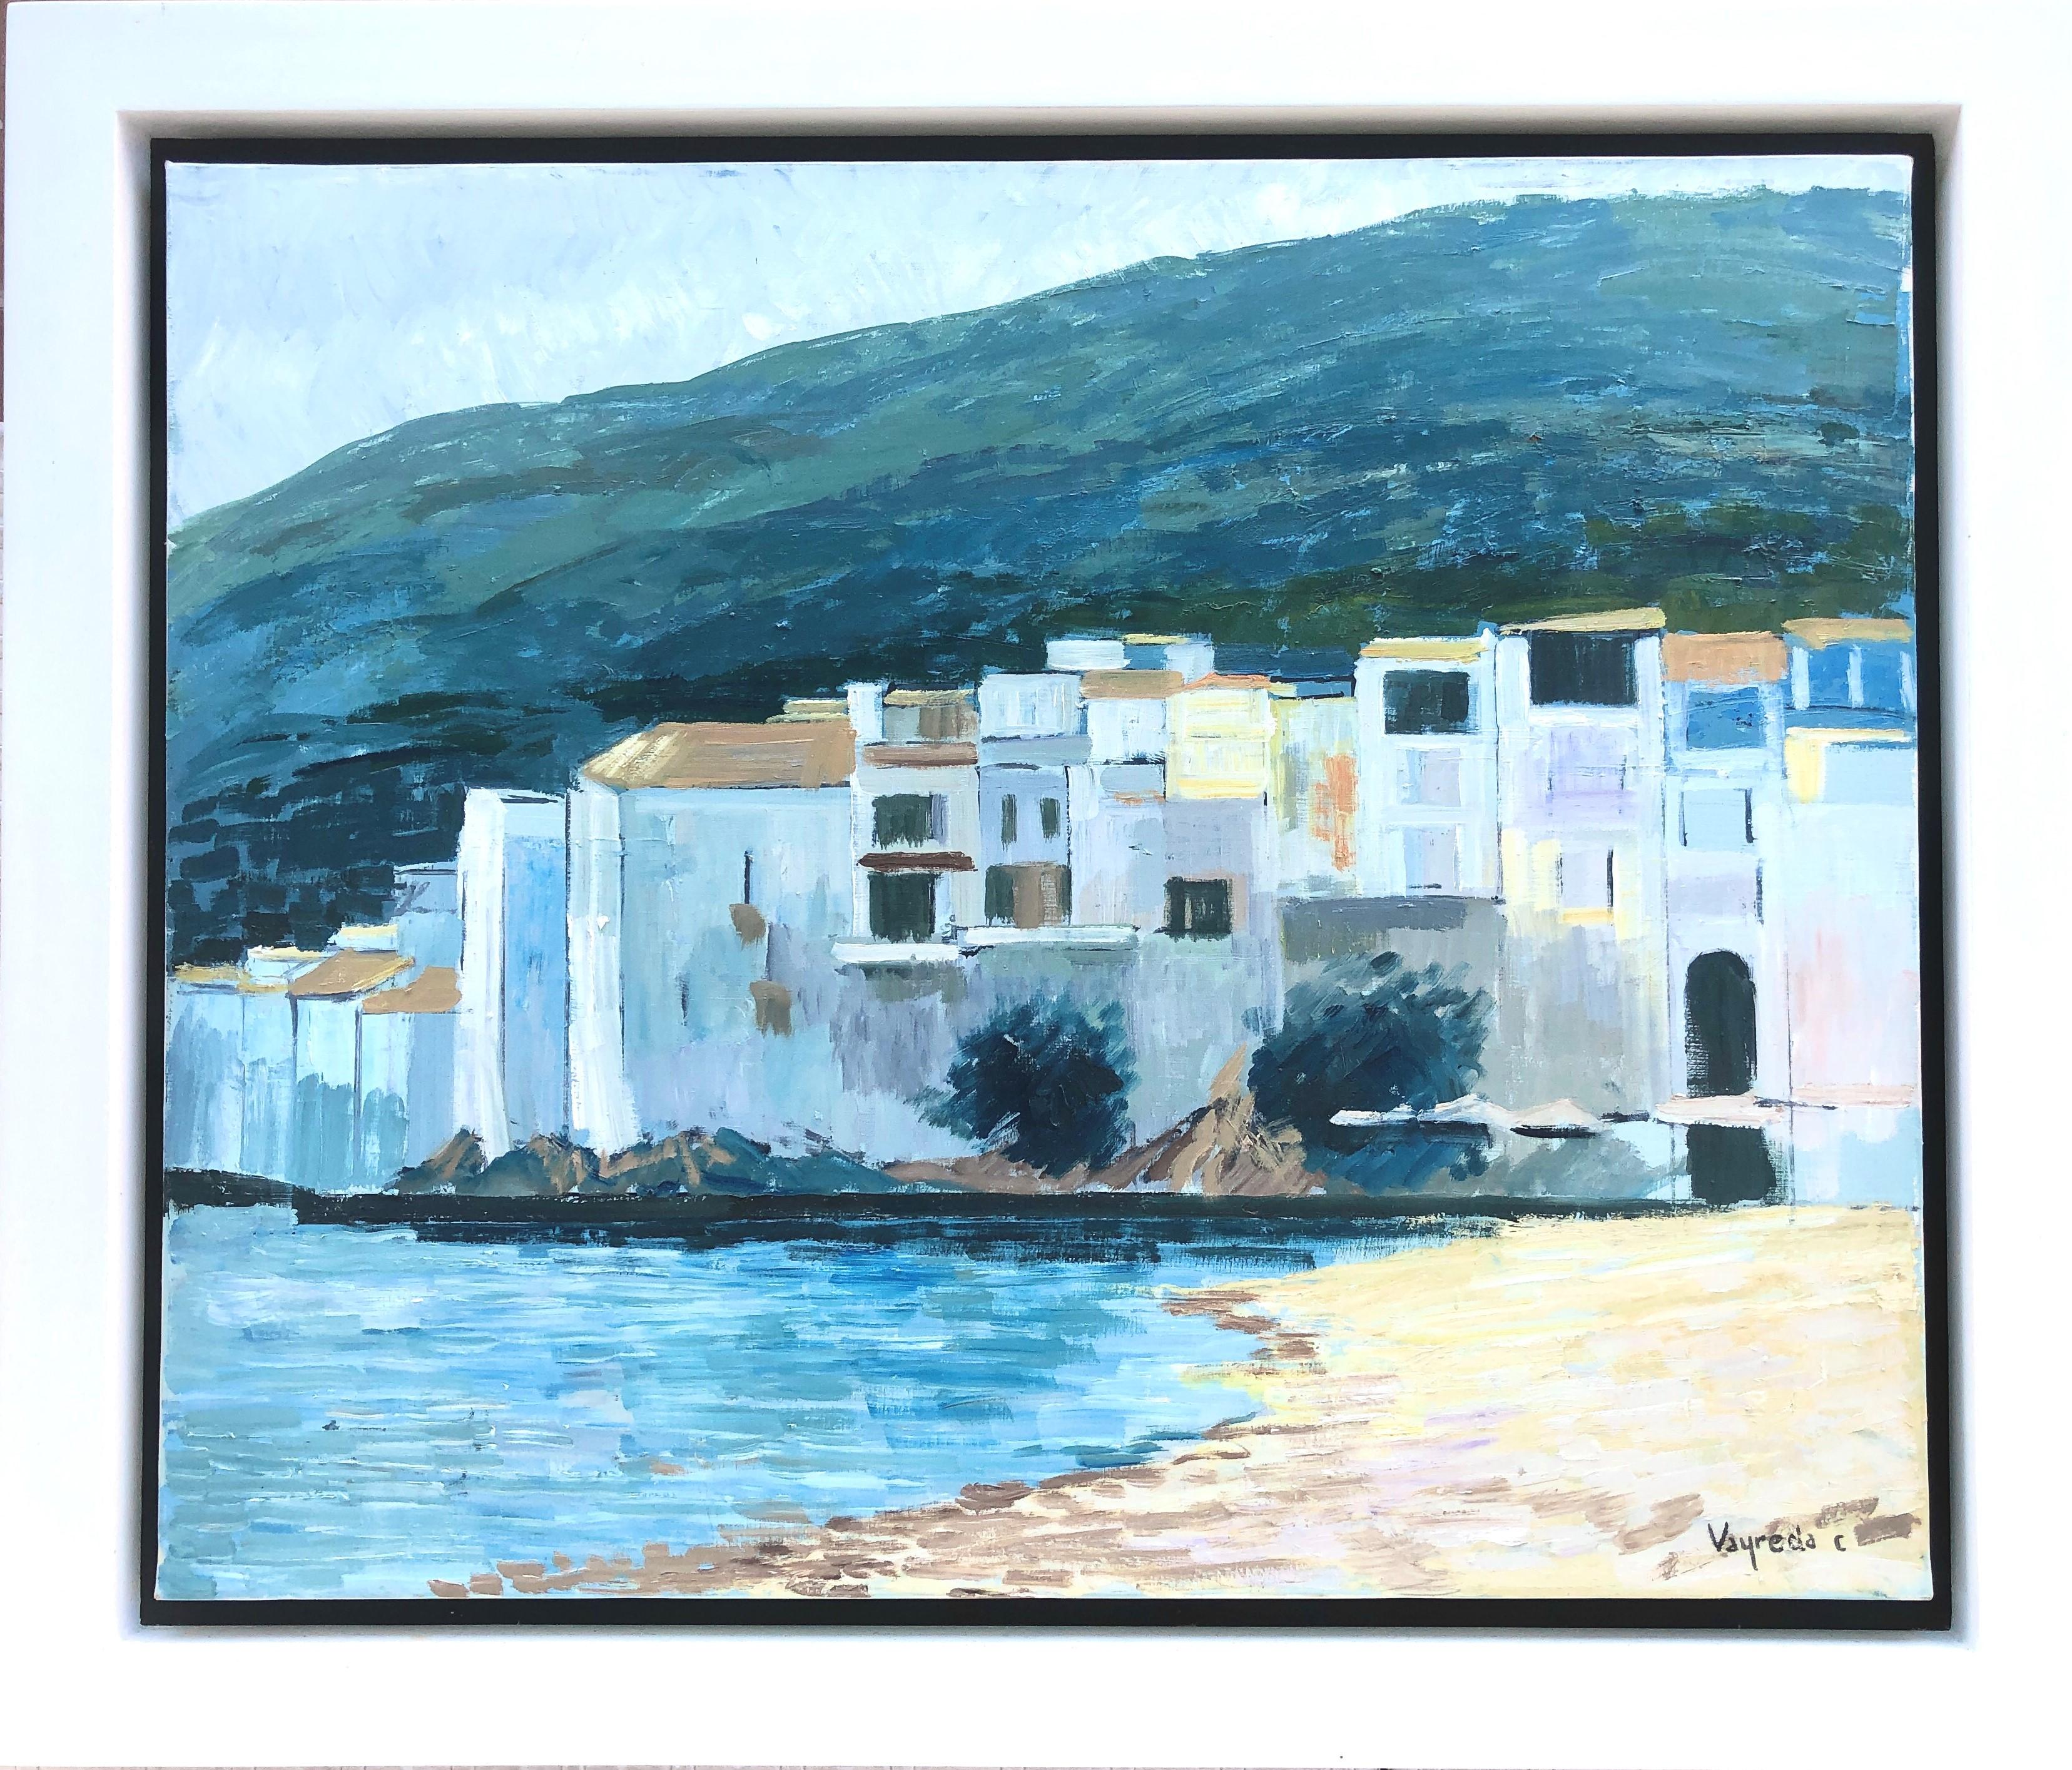 Cadaques Spain oil on canvas painting seascape - Painting by Josep Maria Vayreda Canadell